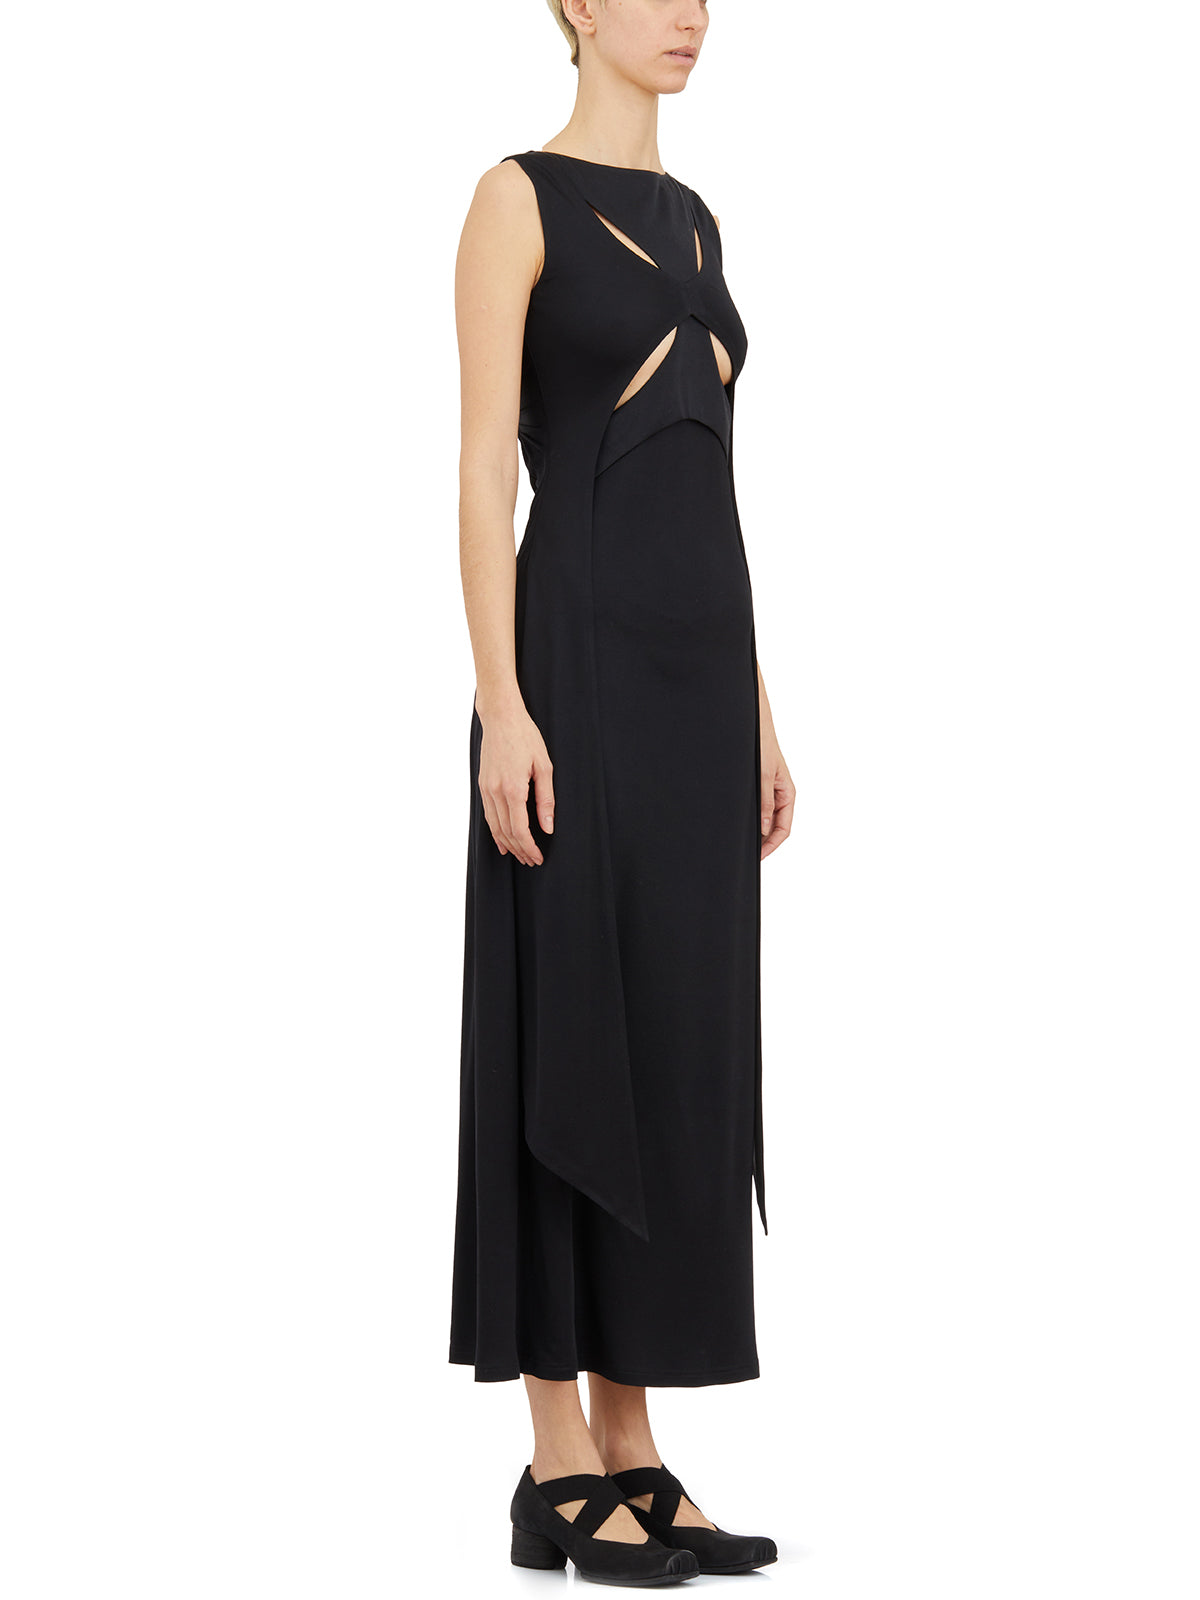 YEHUAFAN Black Long Silk Dress with Back Cutout, Boat Neckline, and Side Slits for Women